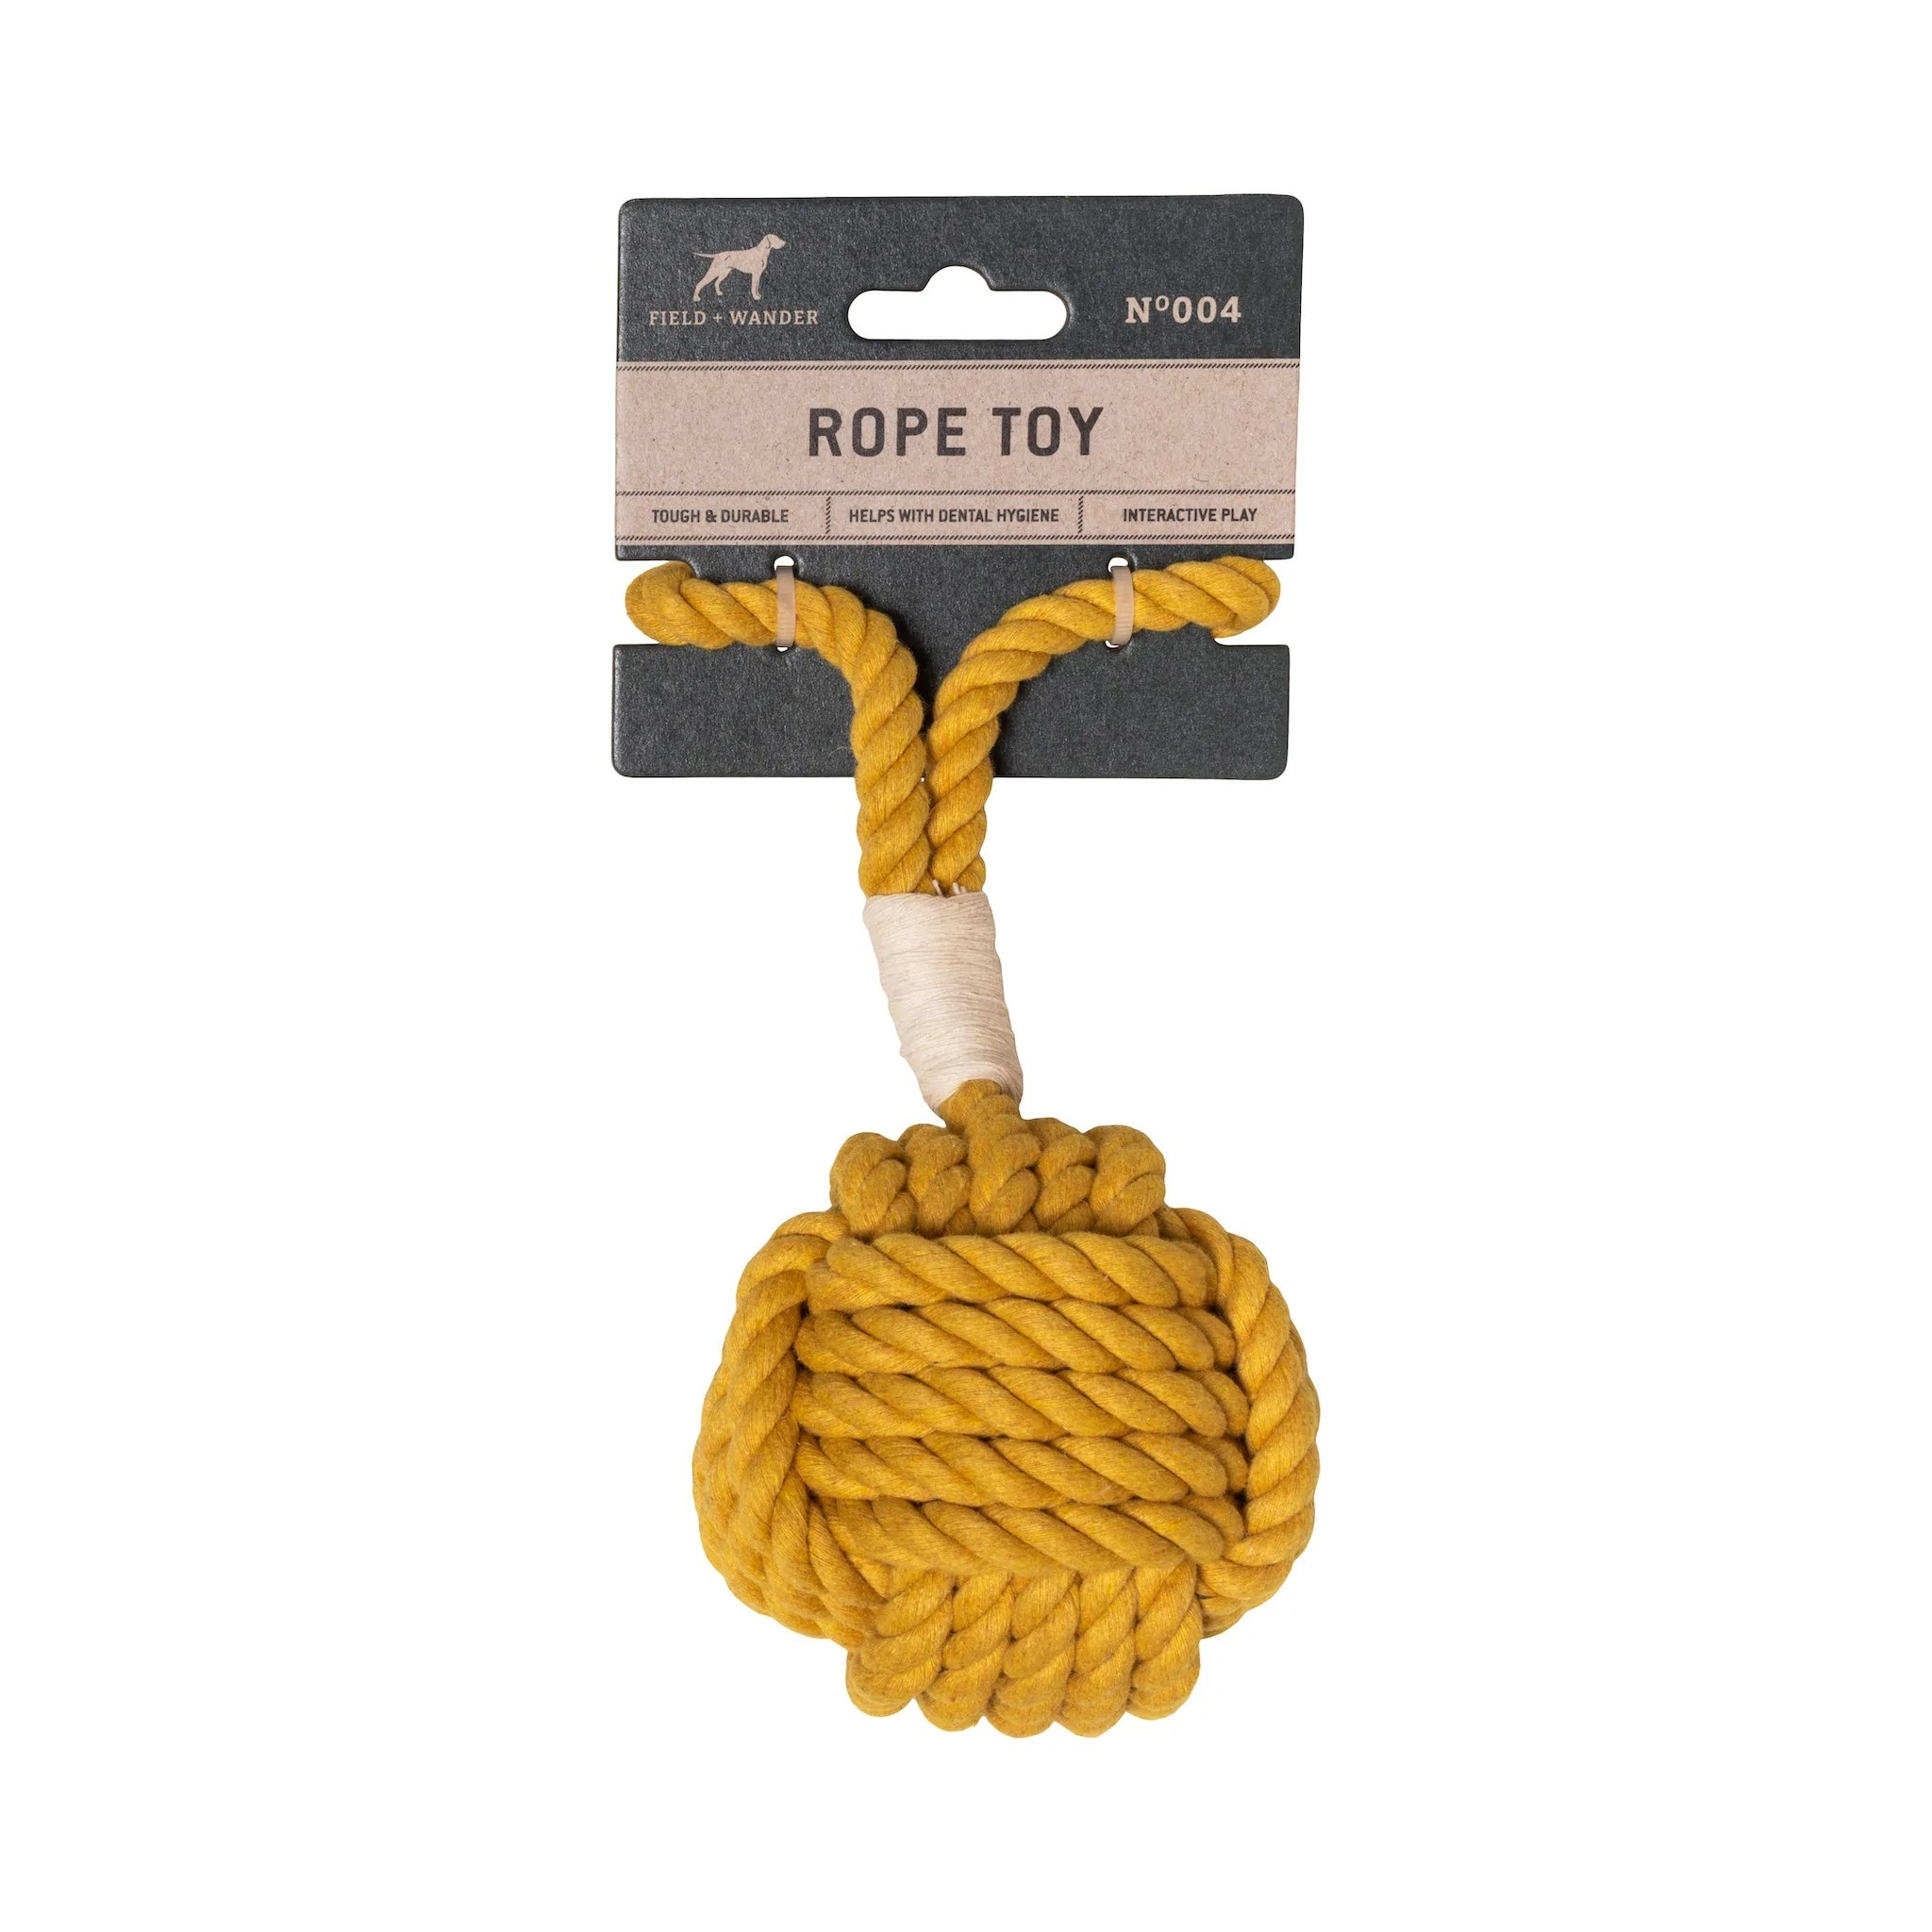 Field and Wander - Rope Toy